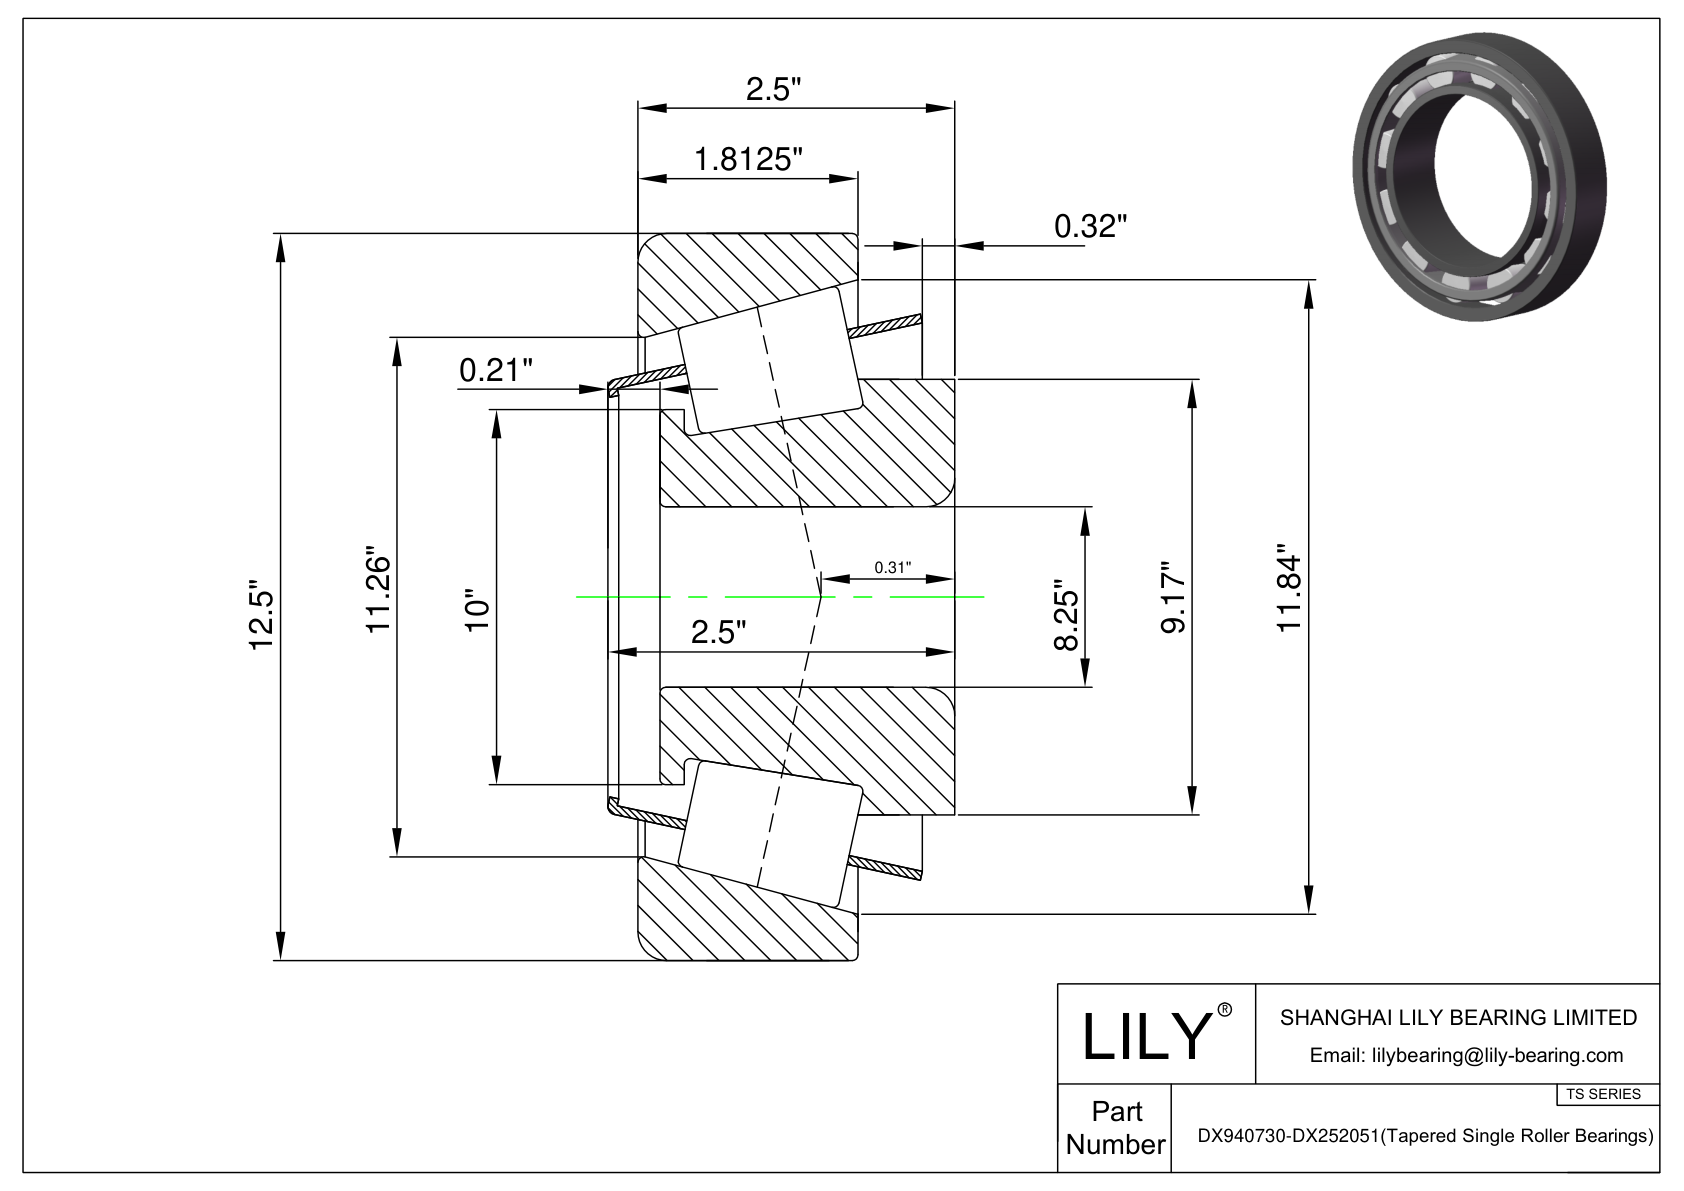 DX940730-DX252051 TS (Tapered Single Roller Bearings) (Imperial) cad drawing